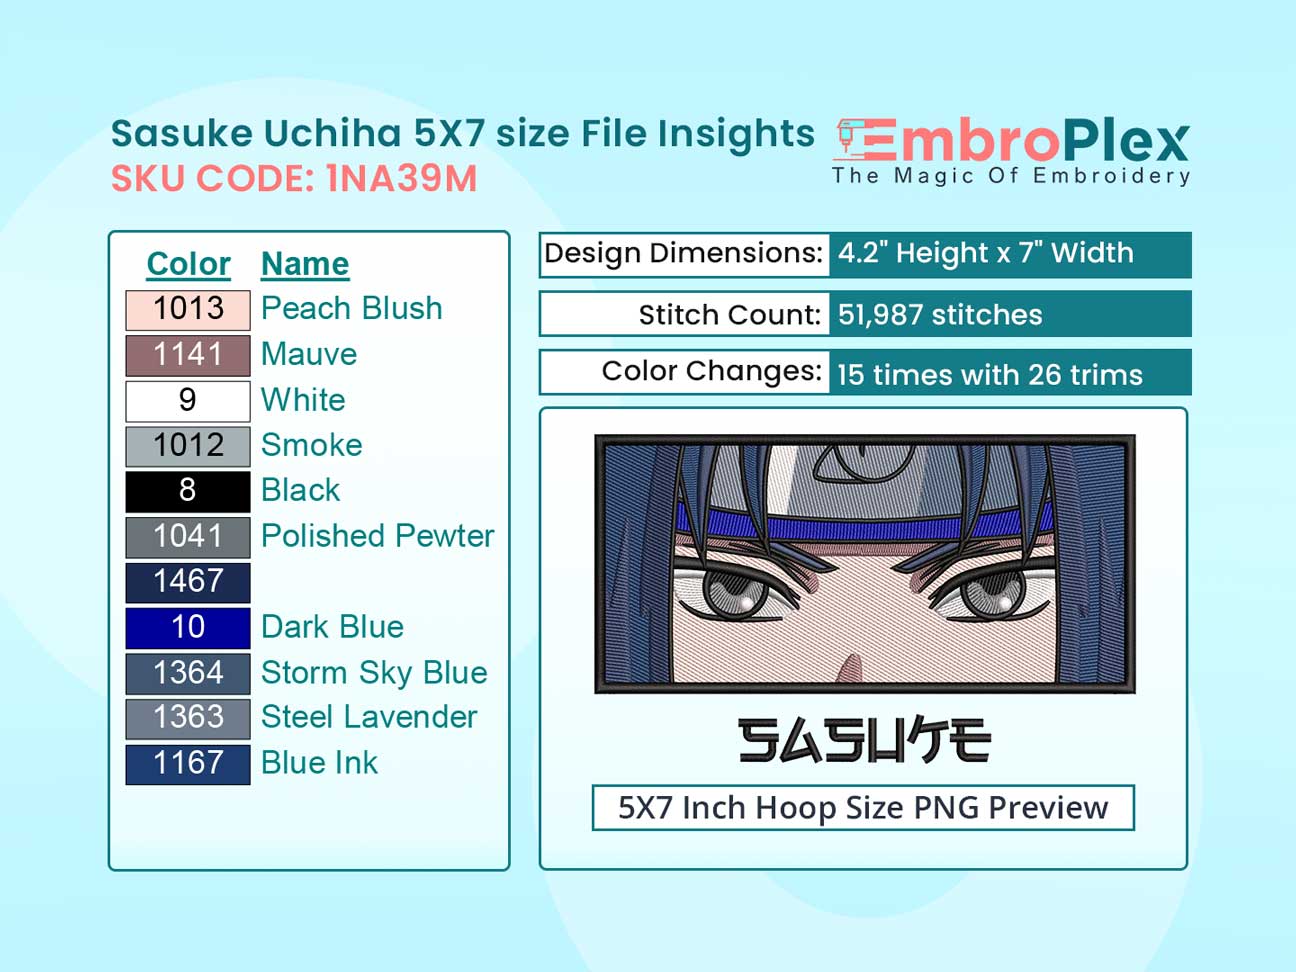 Anime-Inspired Sasuke Uchiha Embroidery Design File - 5x7 Inch hoop Size Variation overview image